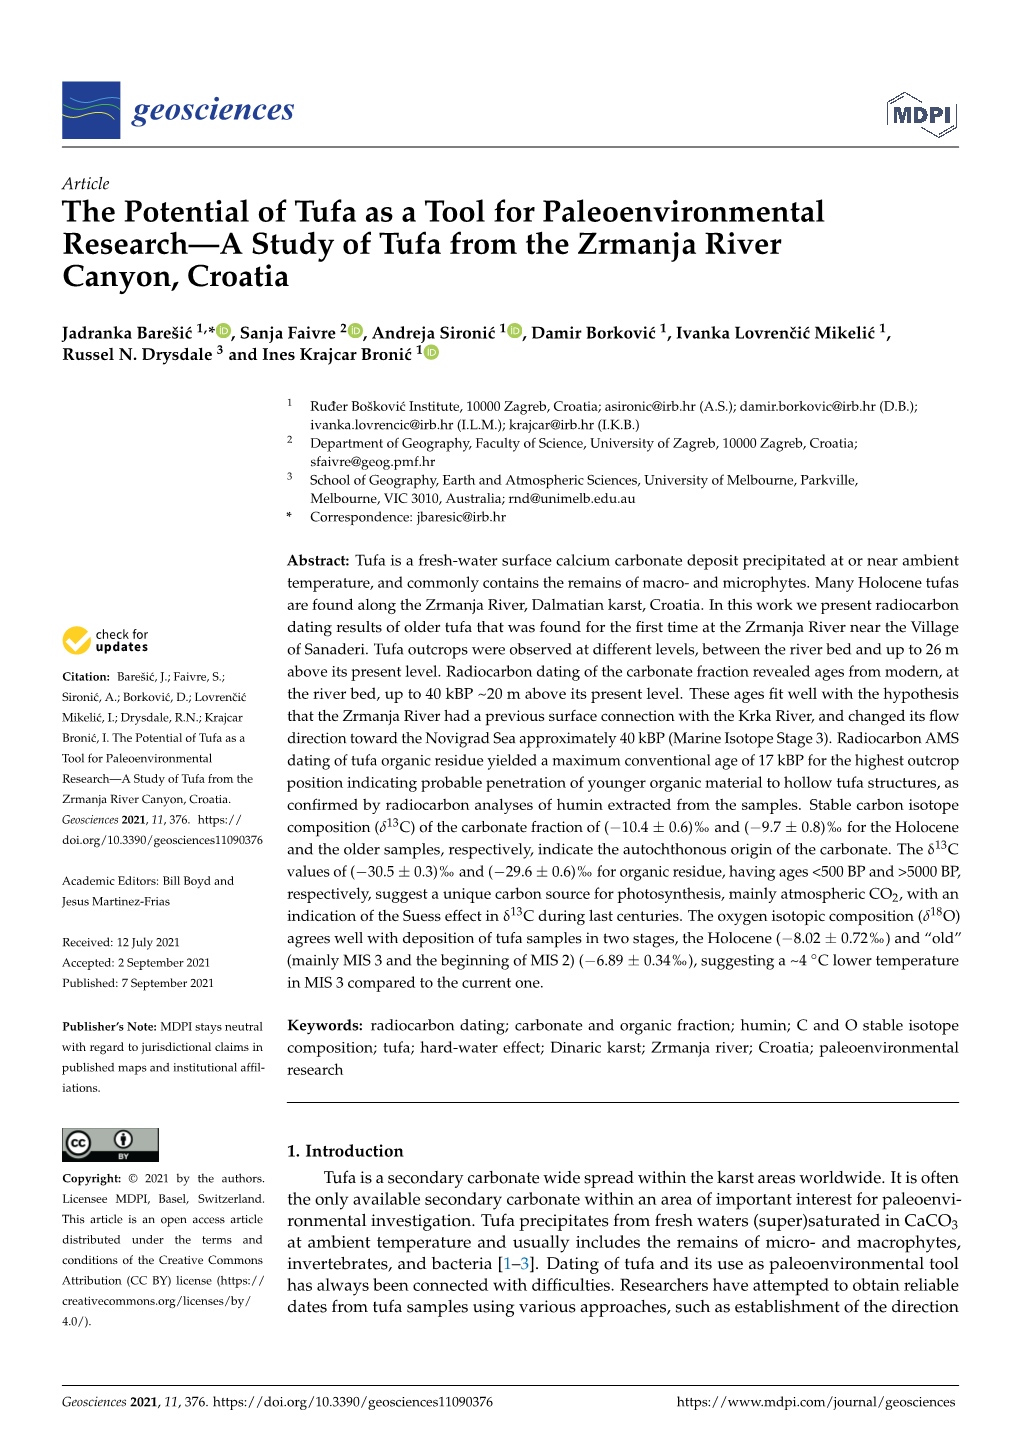 The Potential of Tufa As a Tool for Paleoenvironmental Research—A Study of Tufa from the Zrmanja River Canyon, Croatia